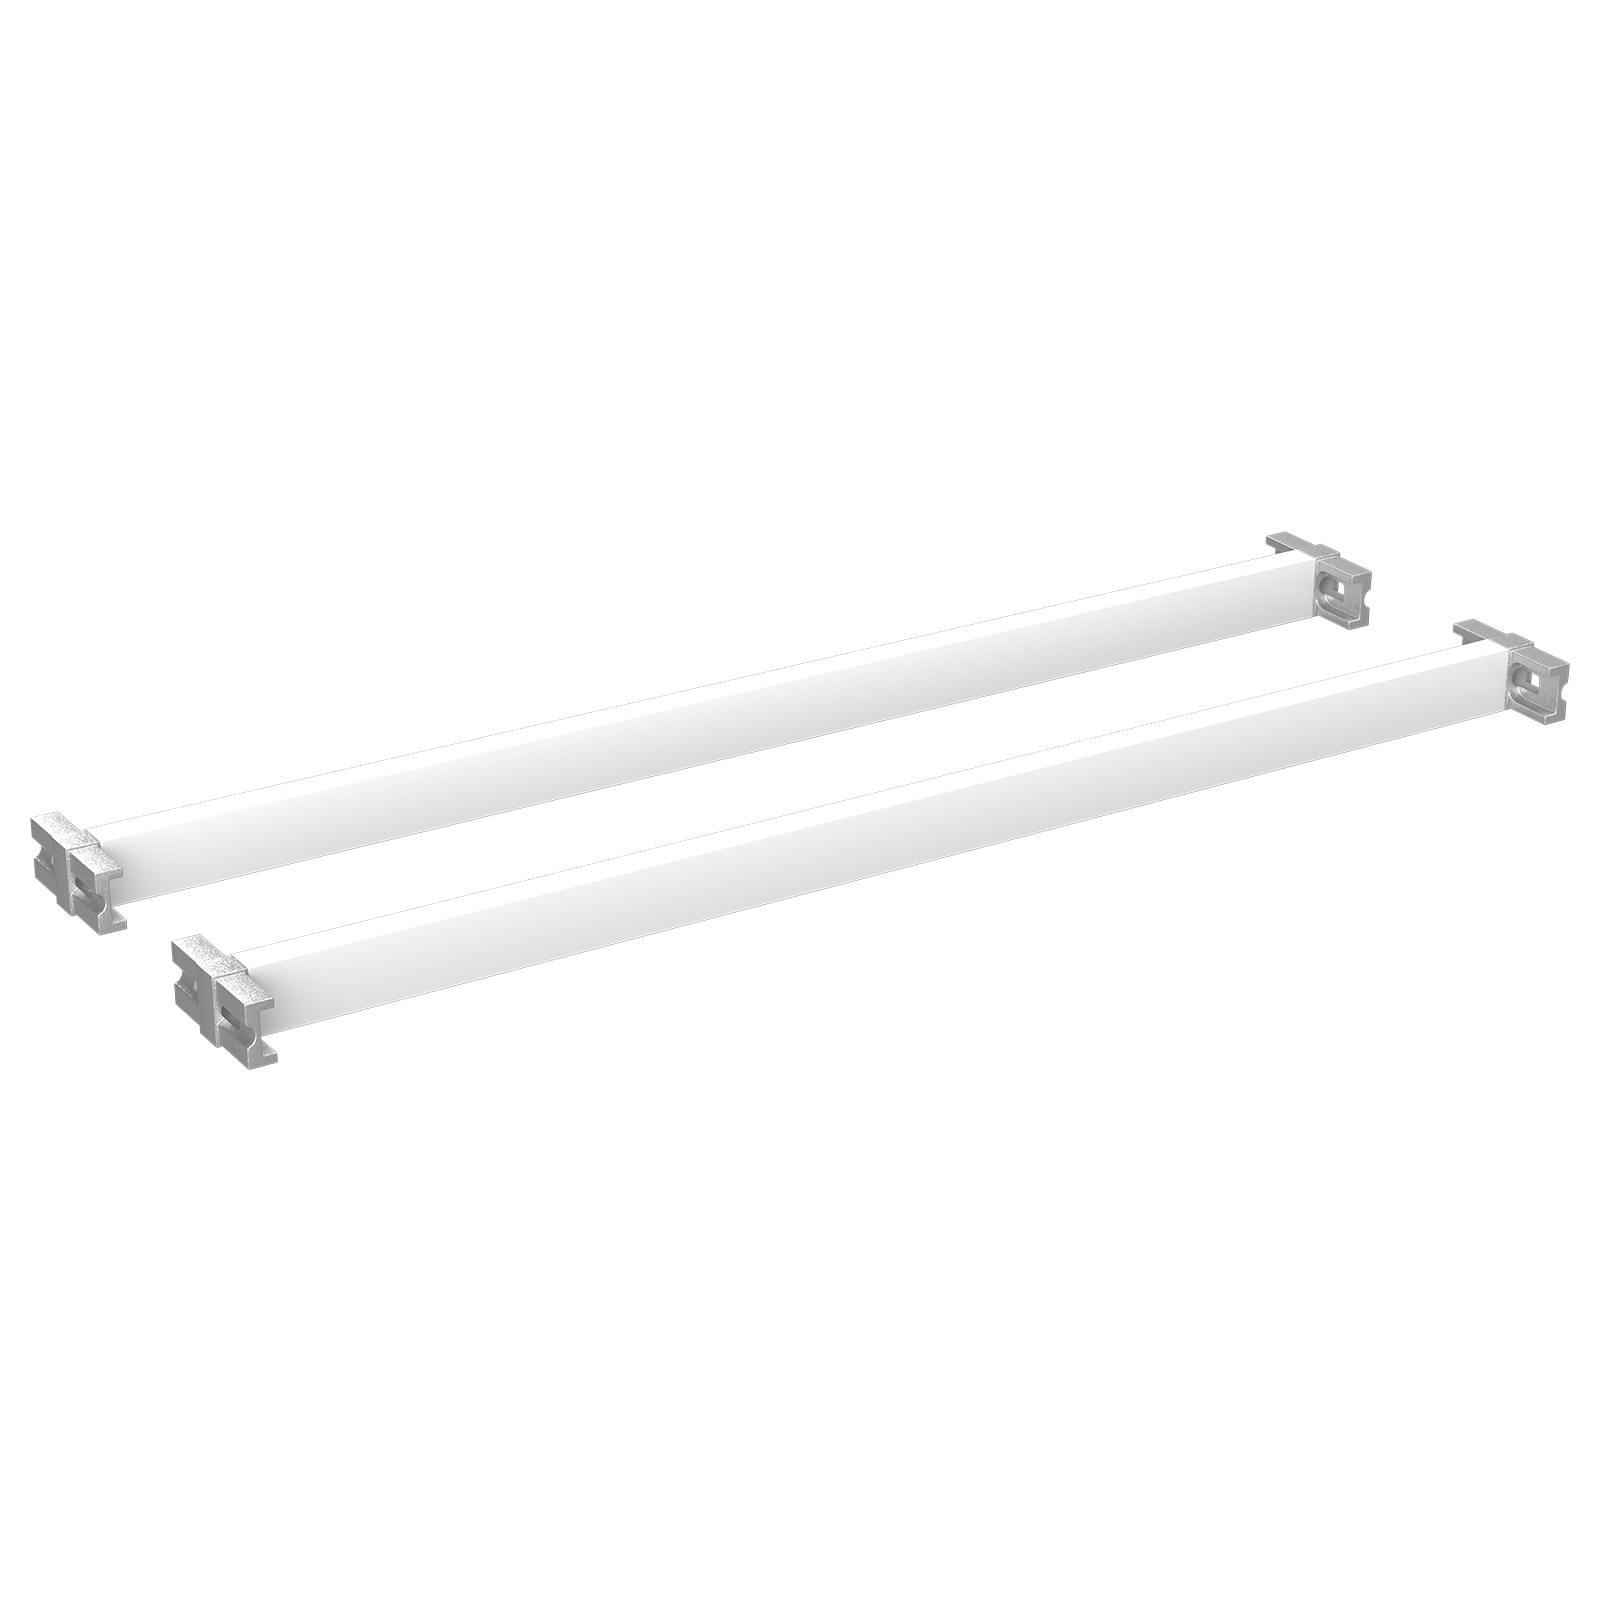 Home Solutions 230mm Cross Bars & T-Connector White